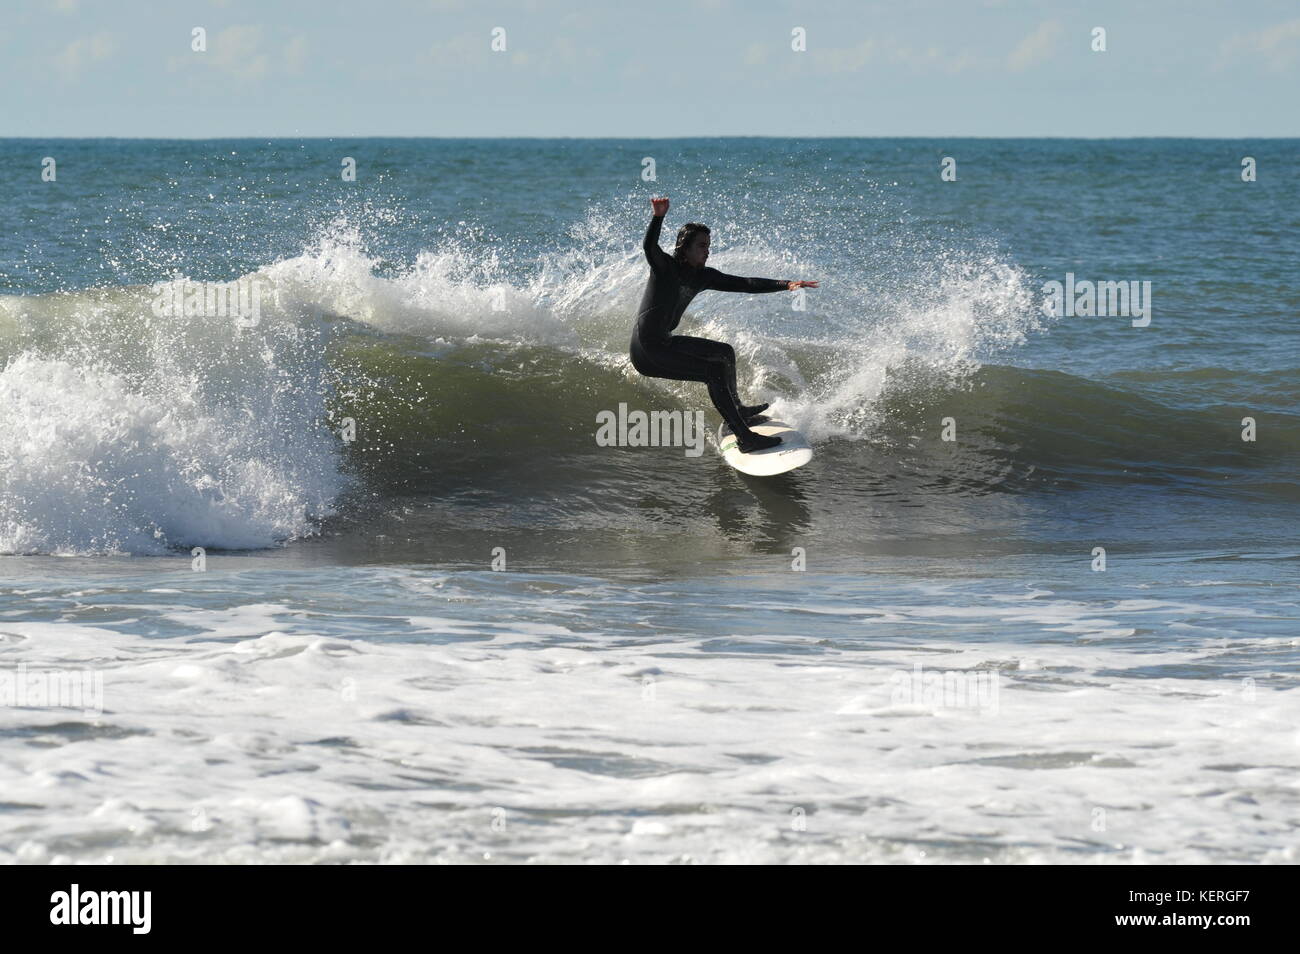 L'ultime surf all round fitness sport Banque D'Images